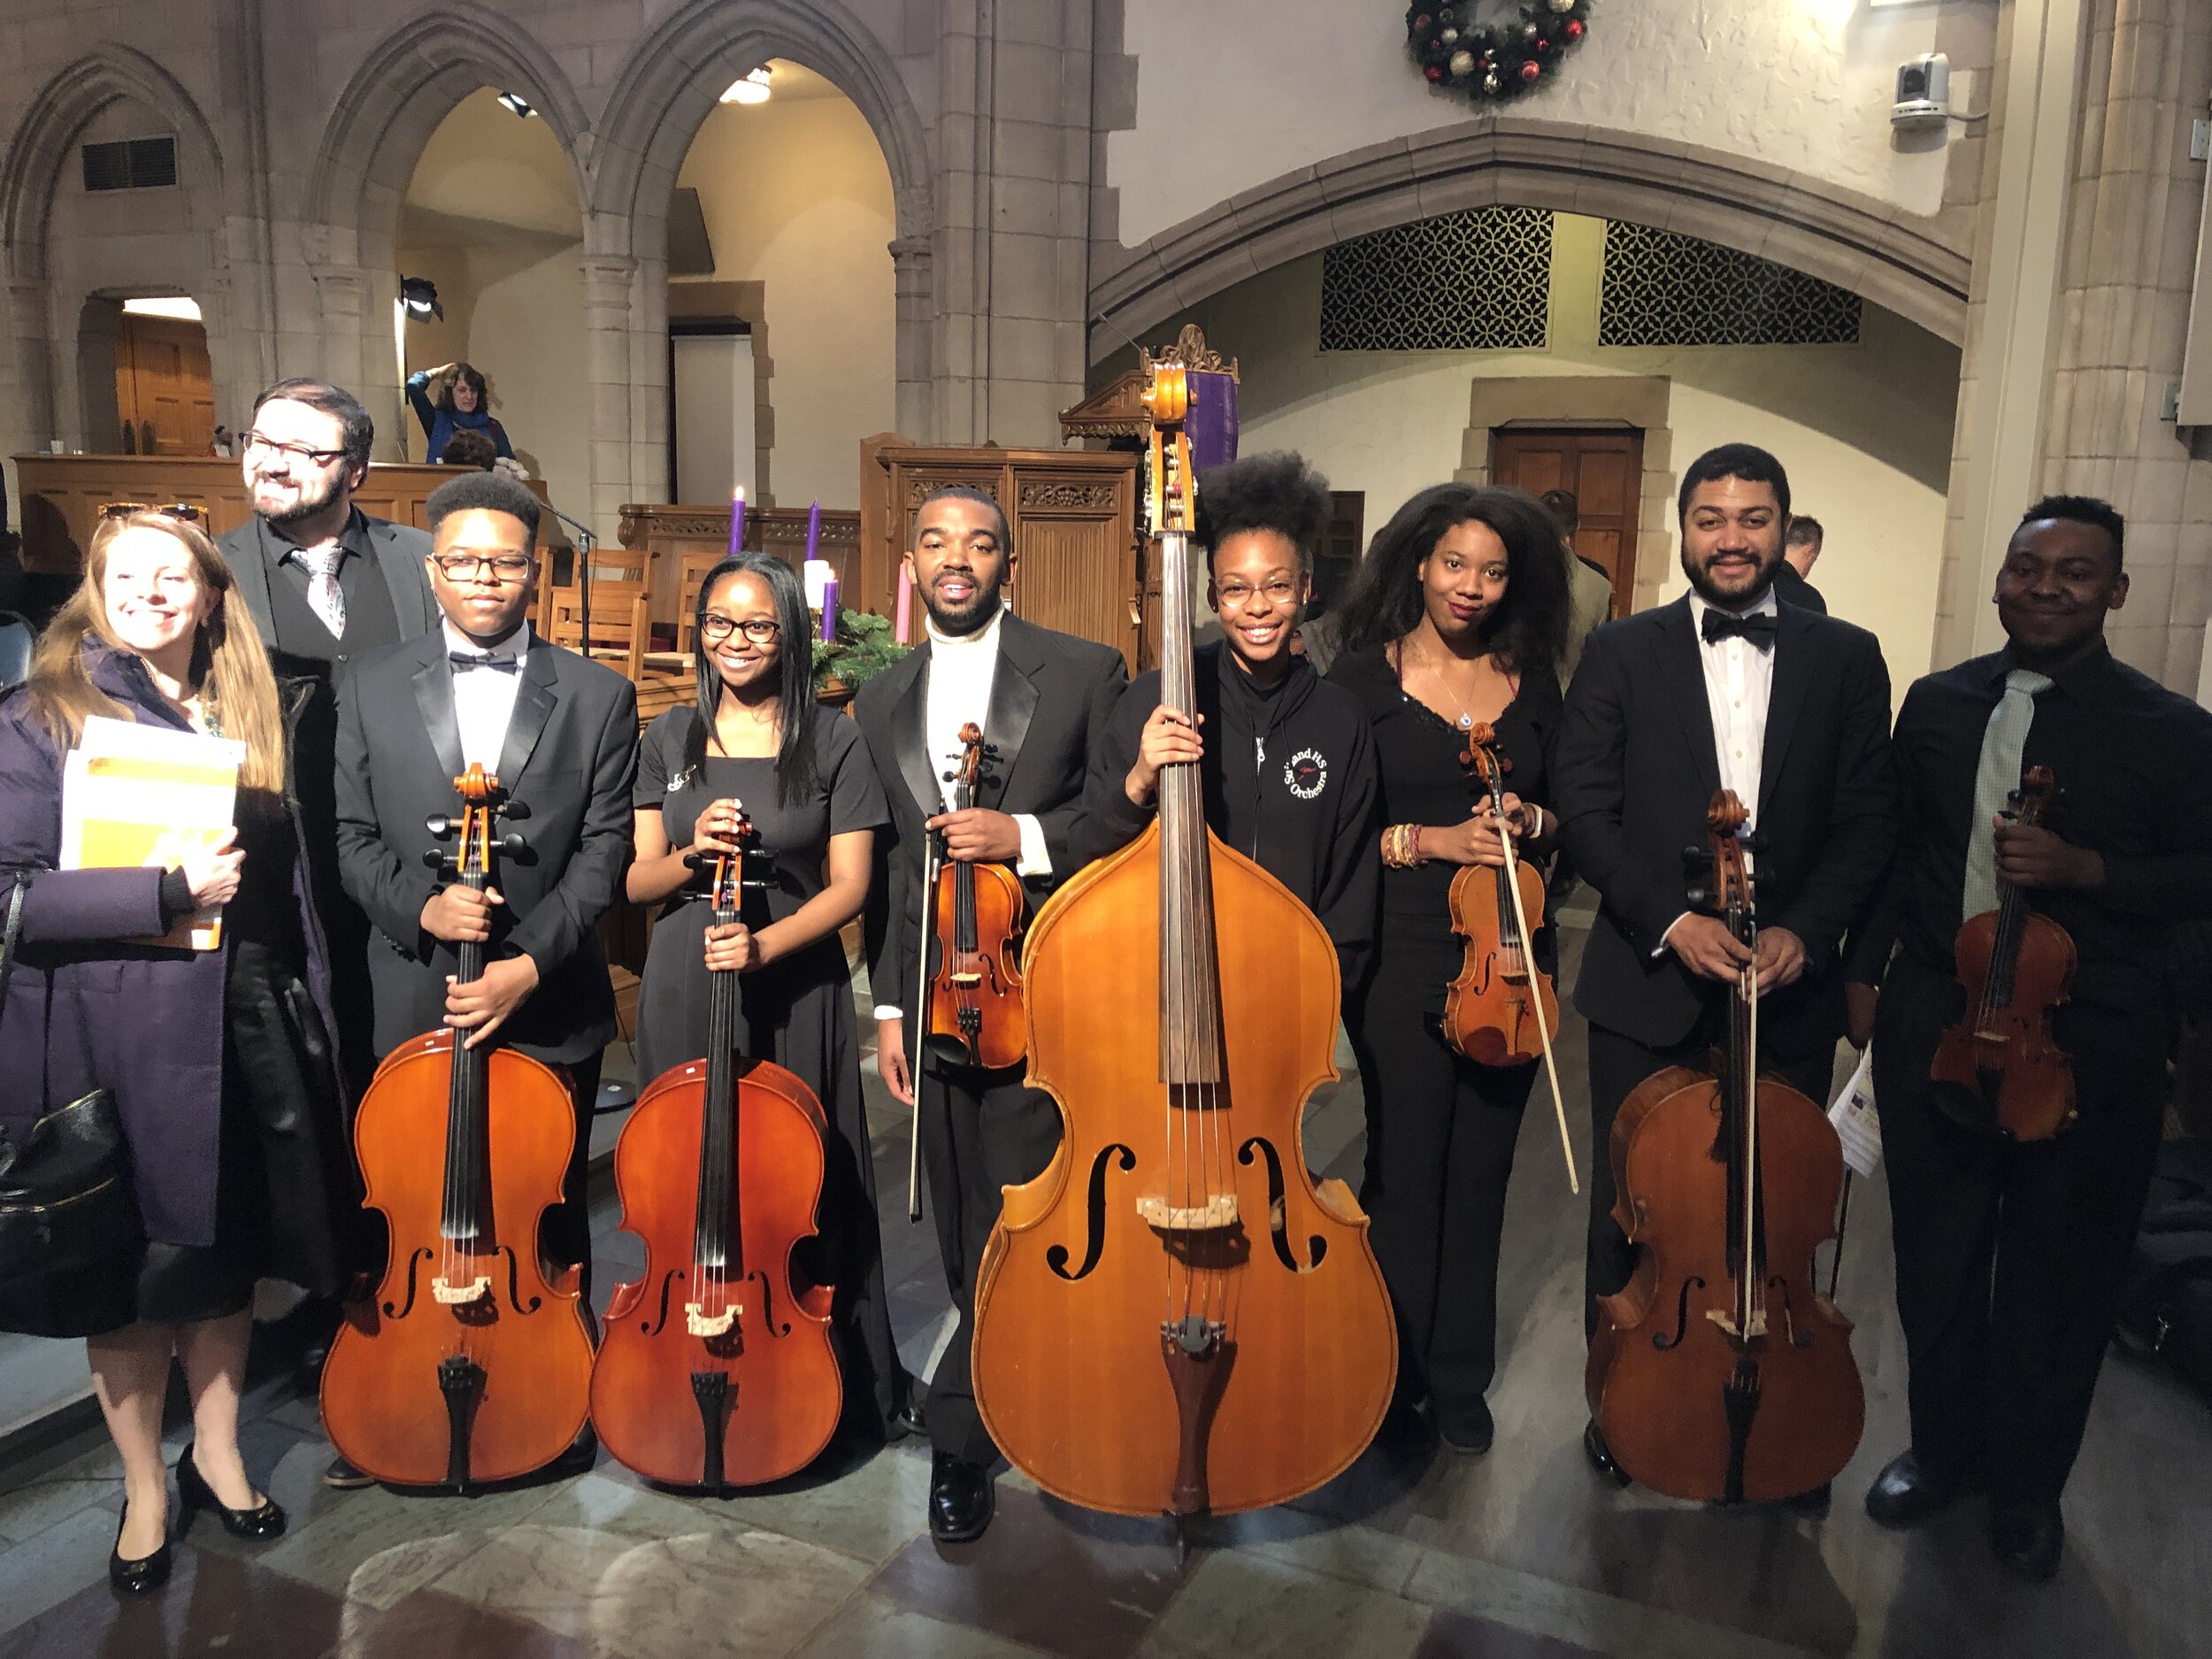 Members of the Messiah Chamber Orchestra, a project of DC Strings Workshop celebrate concerts in the Tenleytown neighborhood of DC.